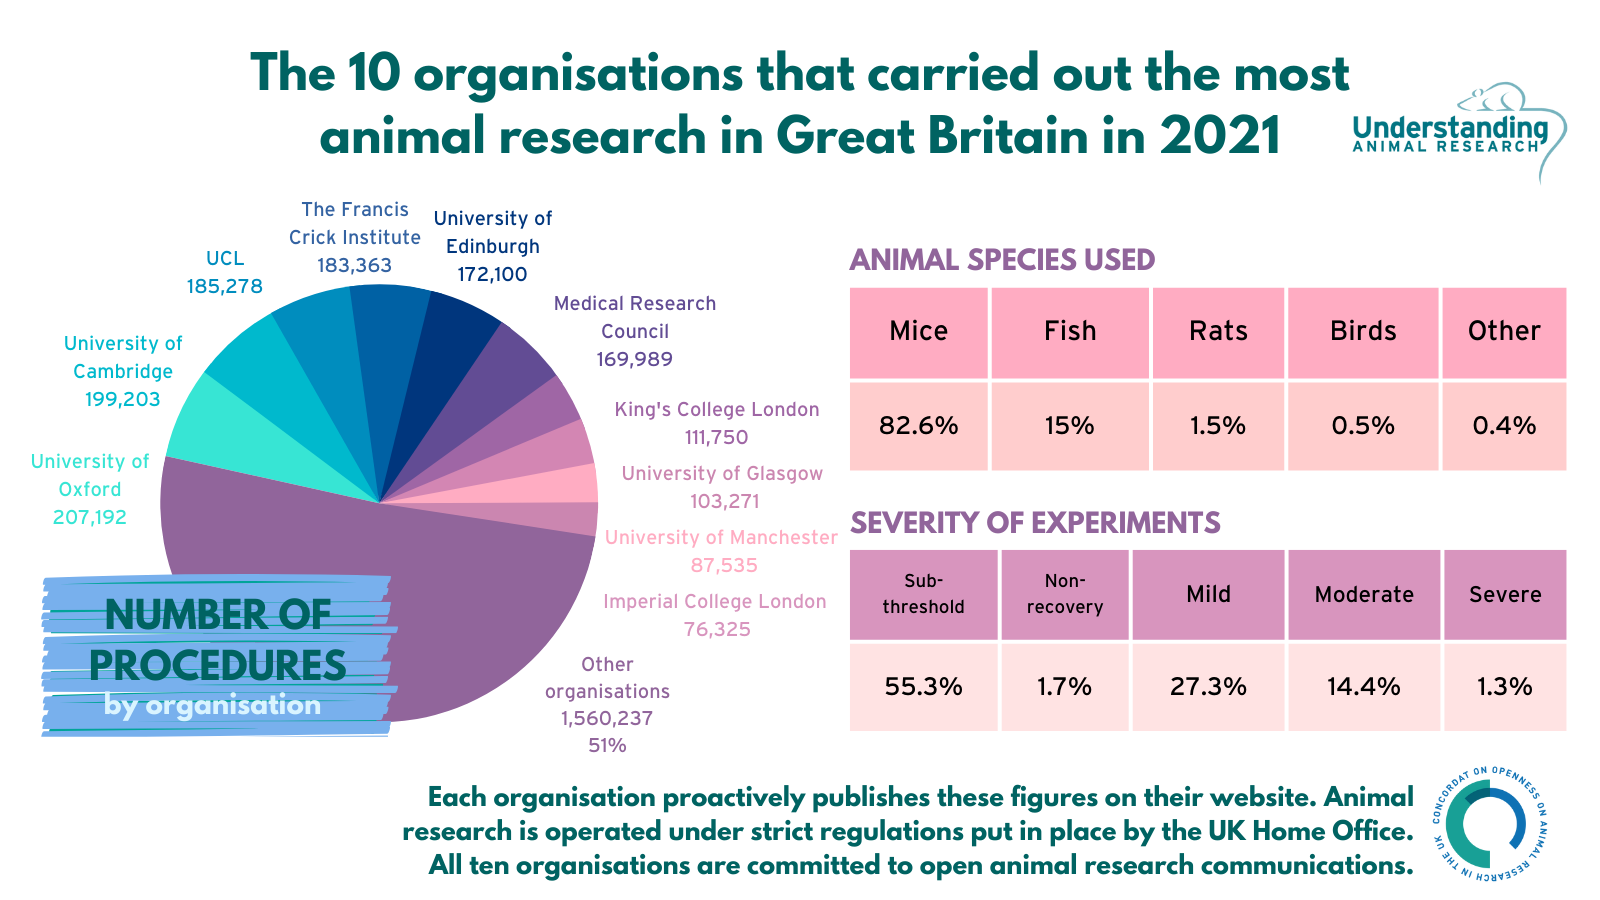 Animal research statistics for Great Britain, 2021 Understanding